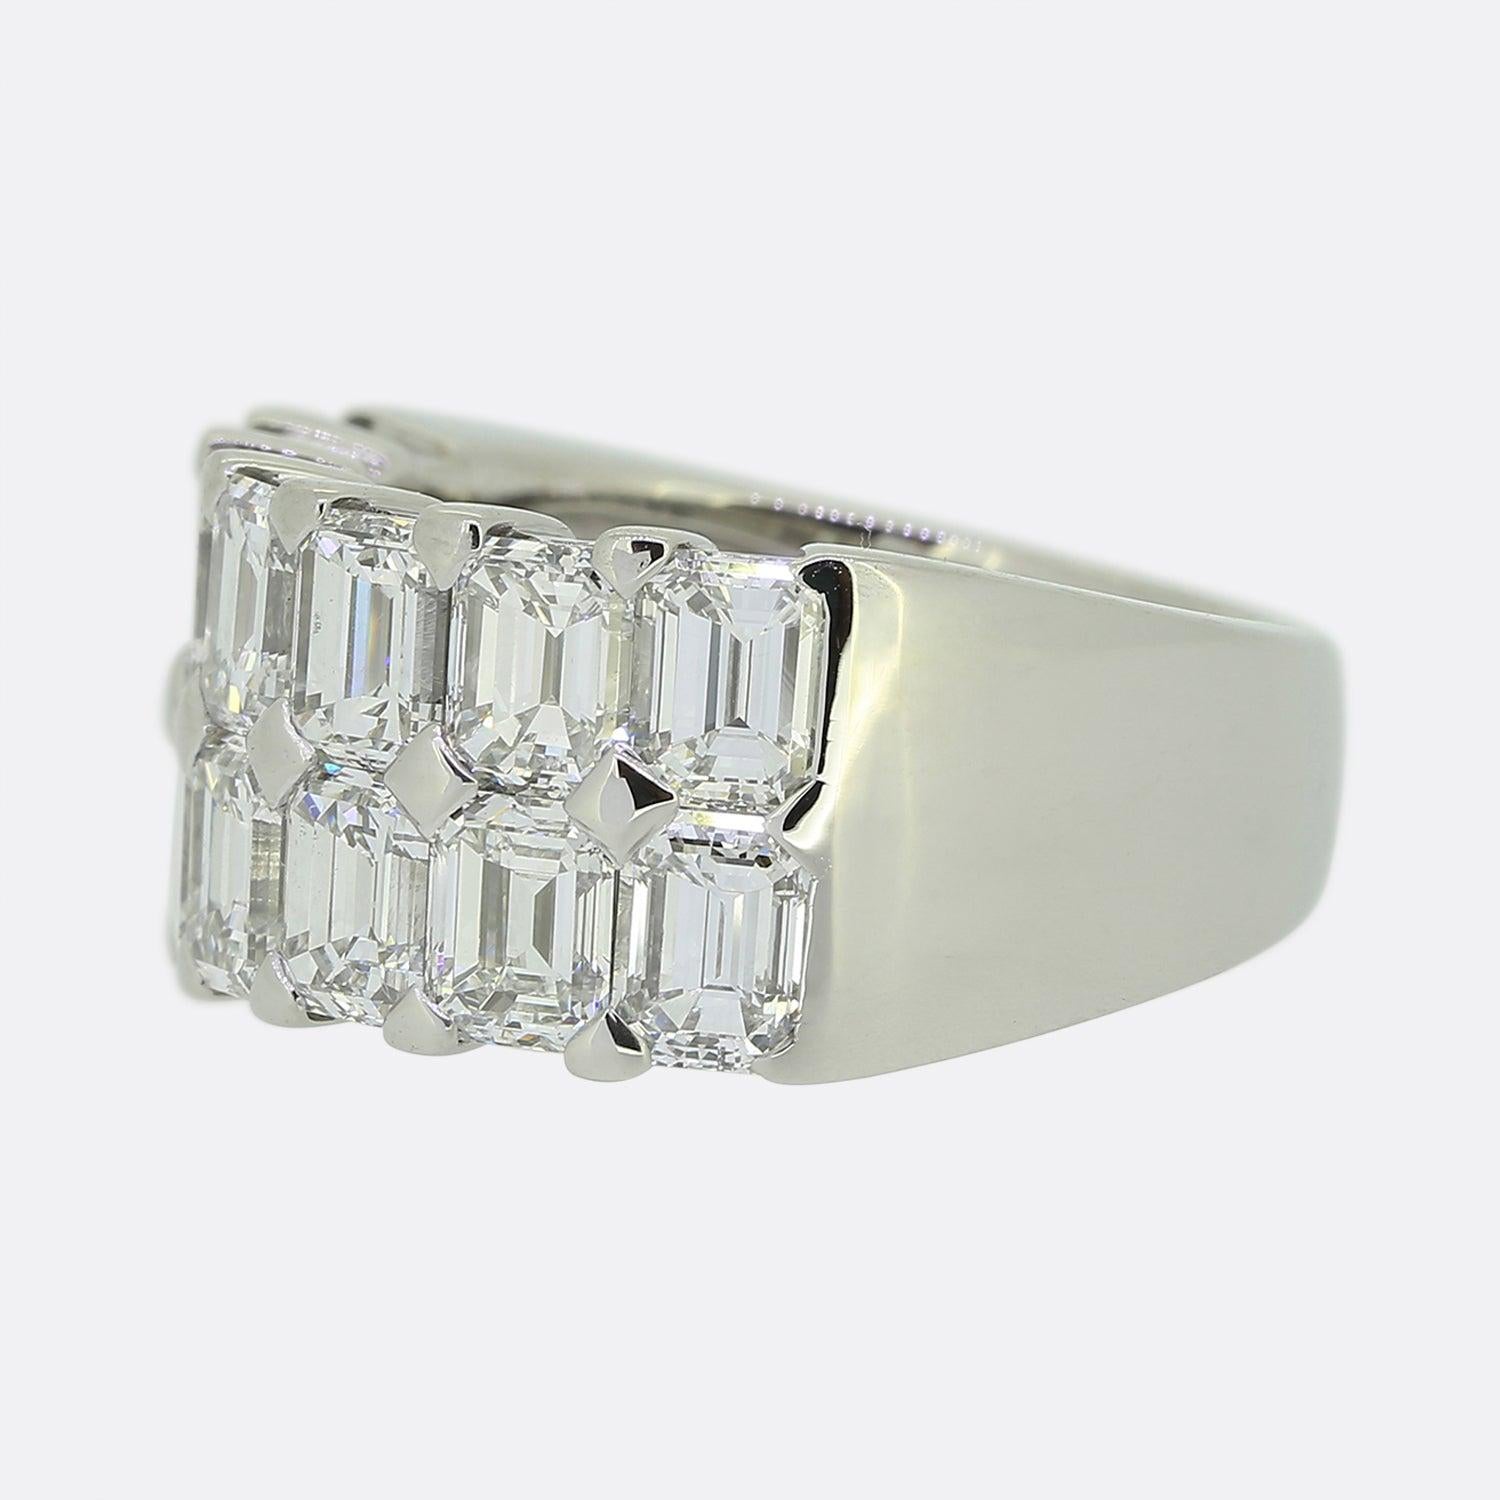 Here we have a truly stunning ring from the luxury jewellery designer Boodles. The ring features an impressive 5.19 carats of perfectly matched emerald cut diamonds. The diamonds sit over two rows and are of an exceptional quality. The ring was